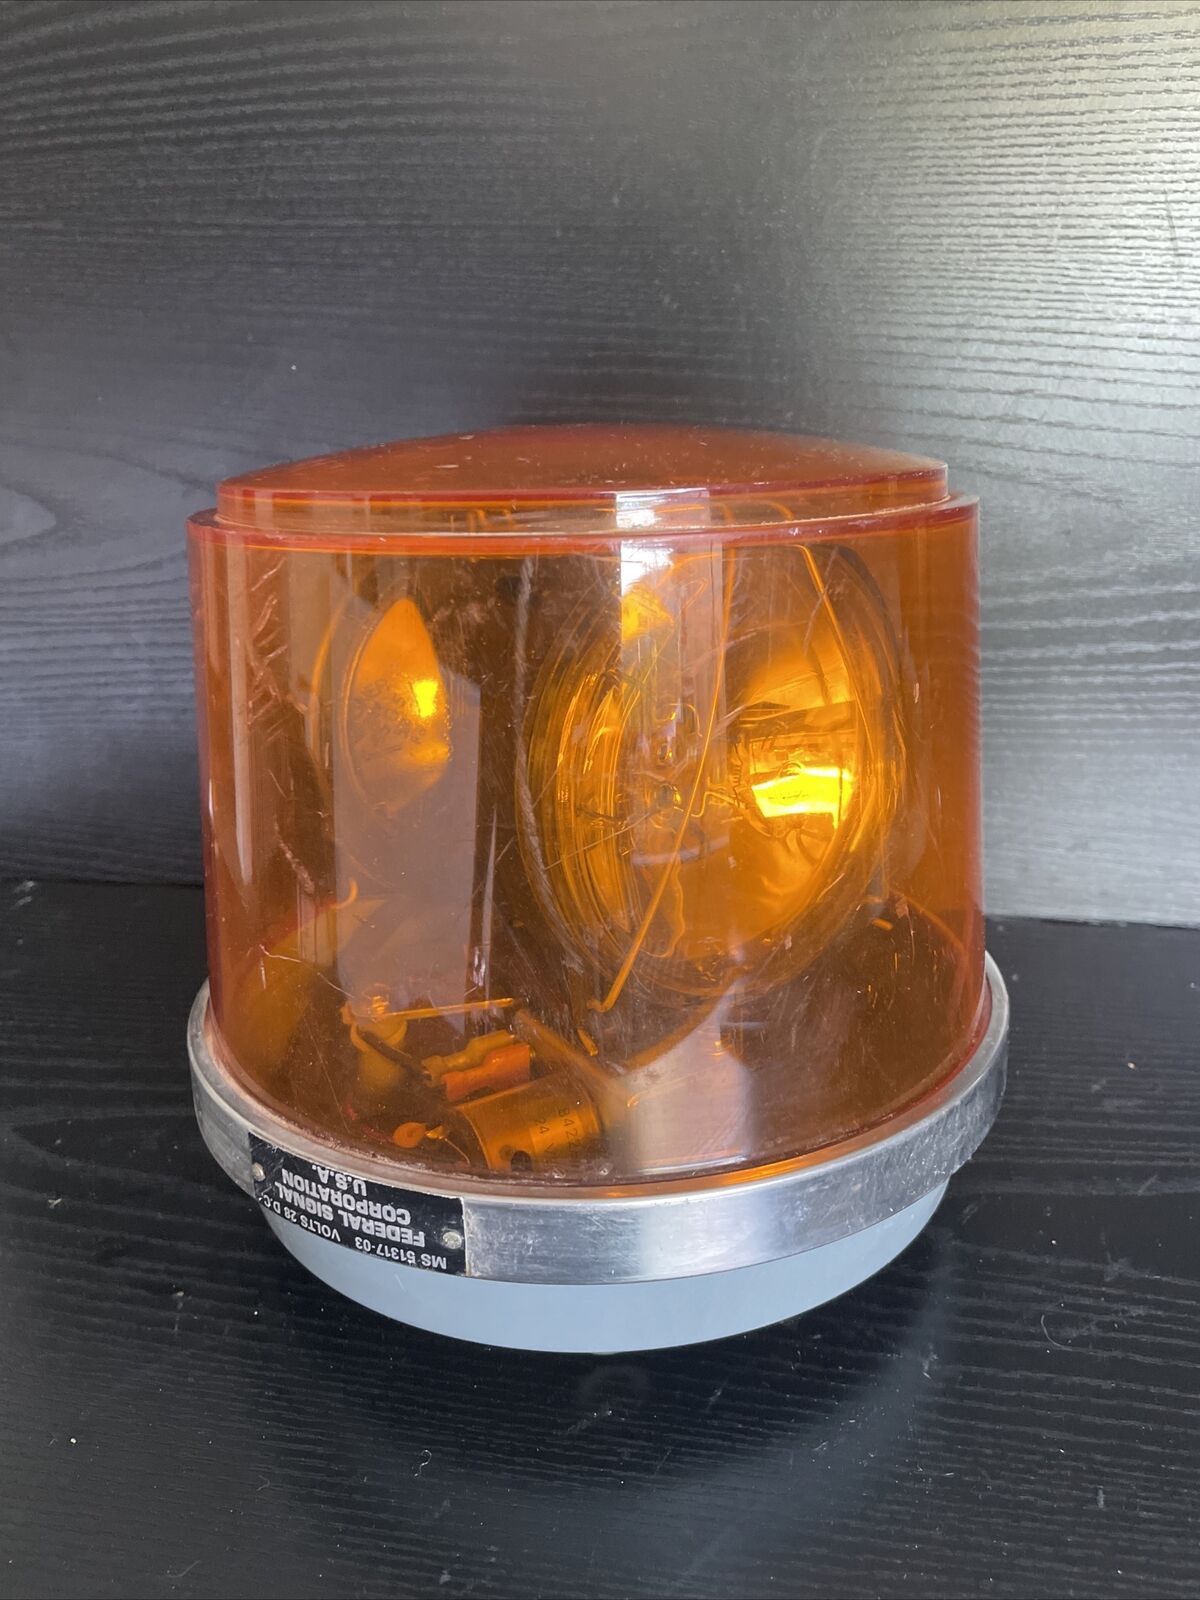 Federal Signal Co MS 51317-03 Beacon Rotating Emergency Light Amber Dome Untest